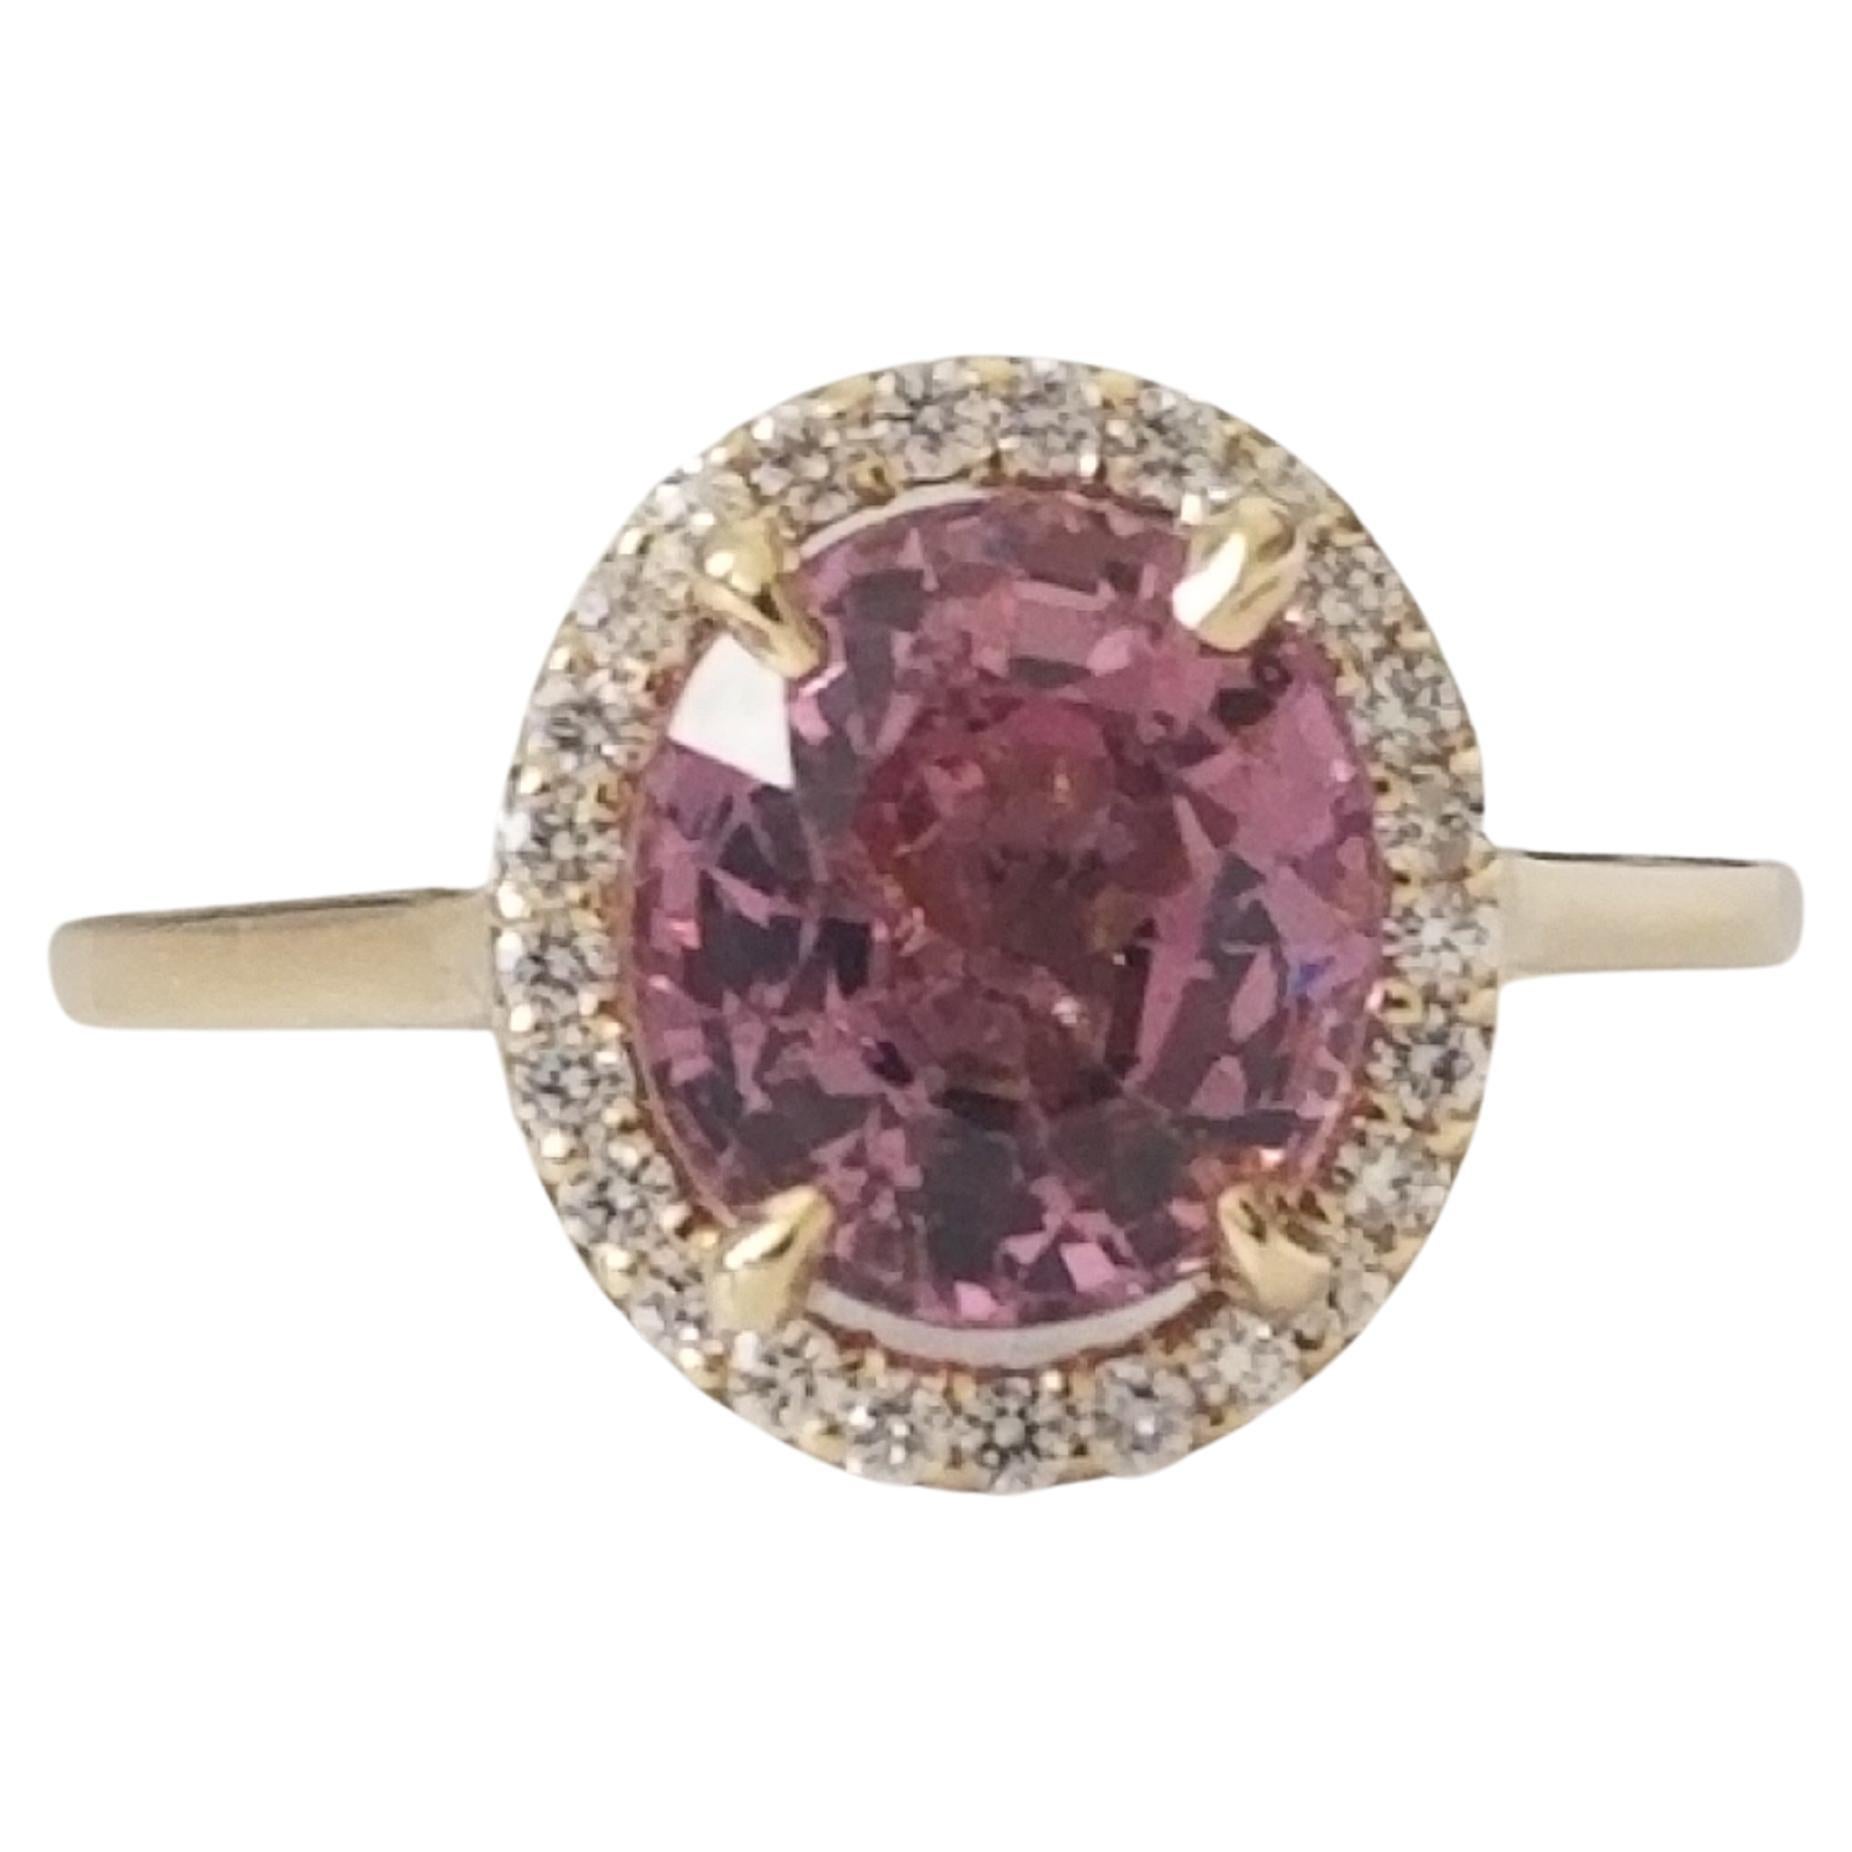 NEW GIA Cert Unheated Natural Oval Pink Spinel Diamond Ring in 14K Yellow Gold (Bague en or jaune 14 carats)